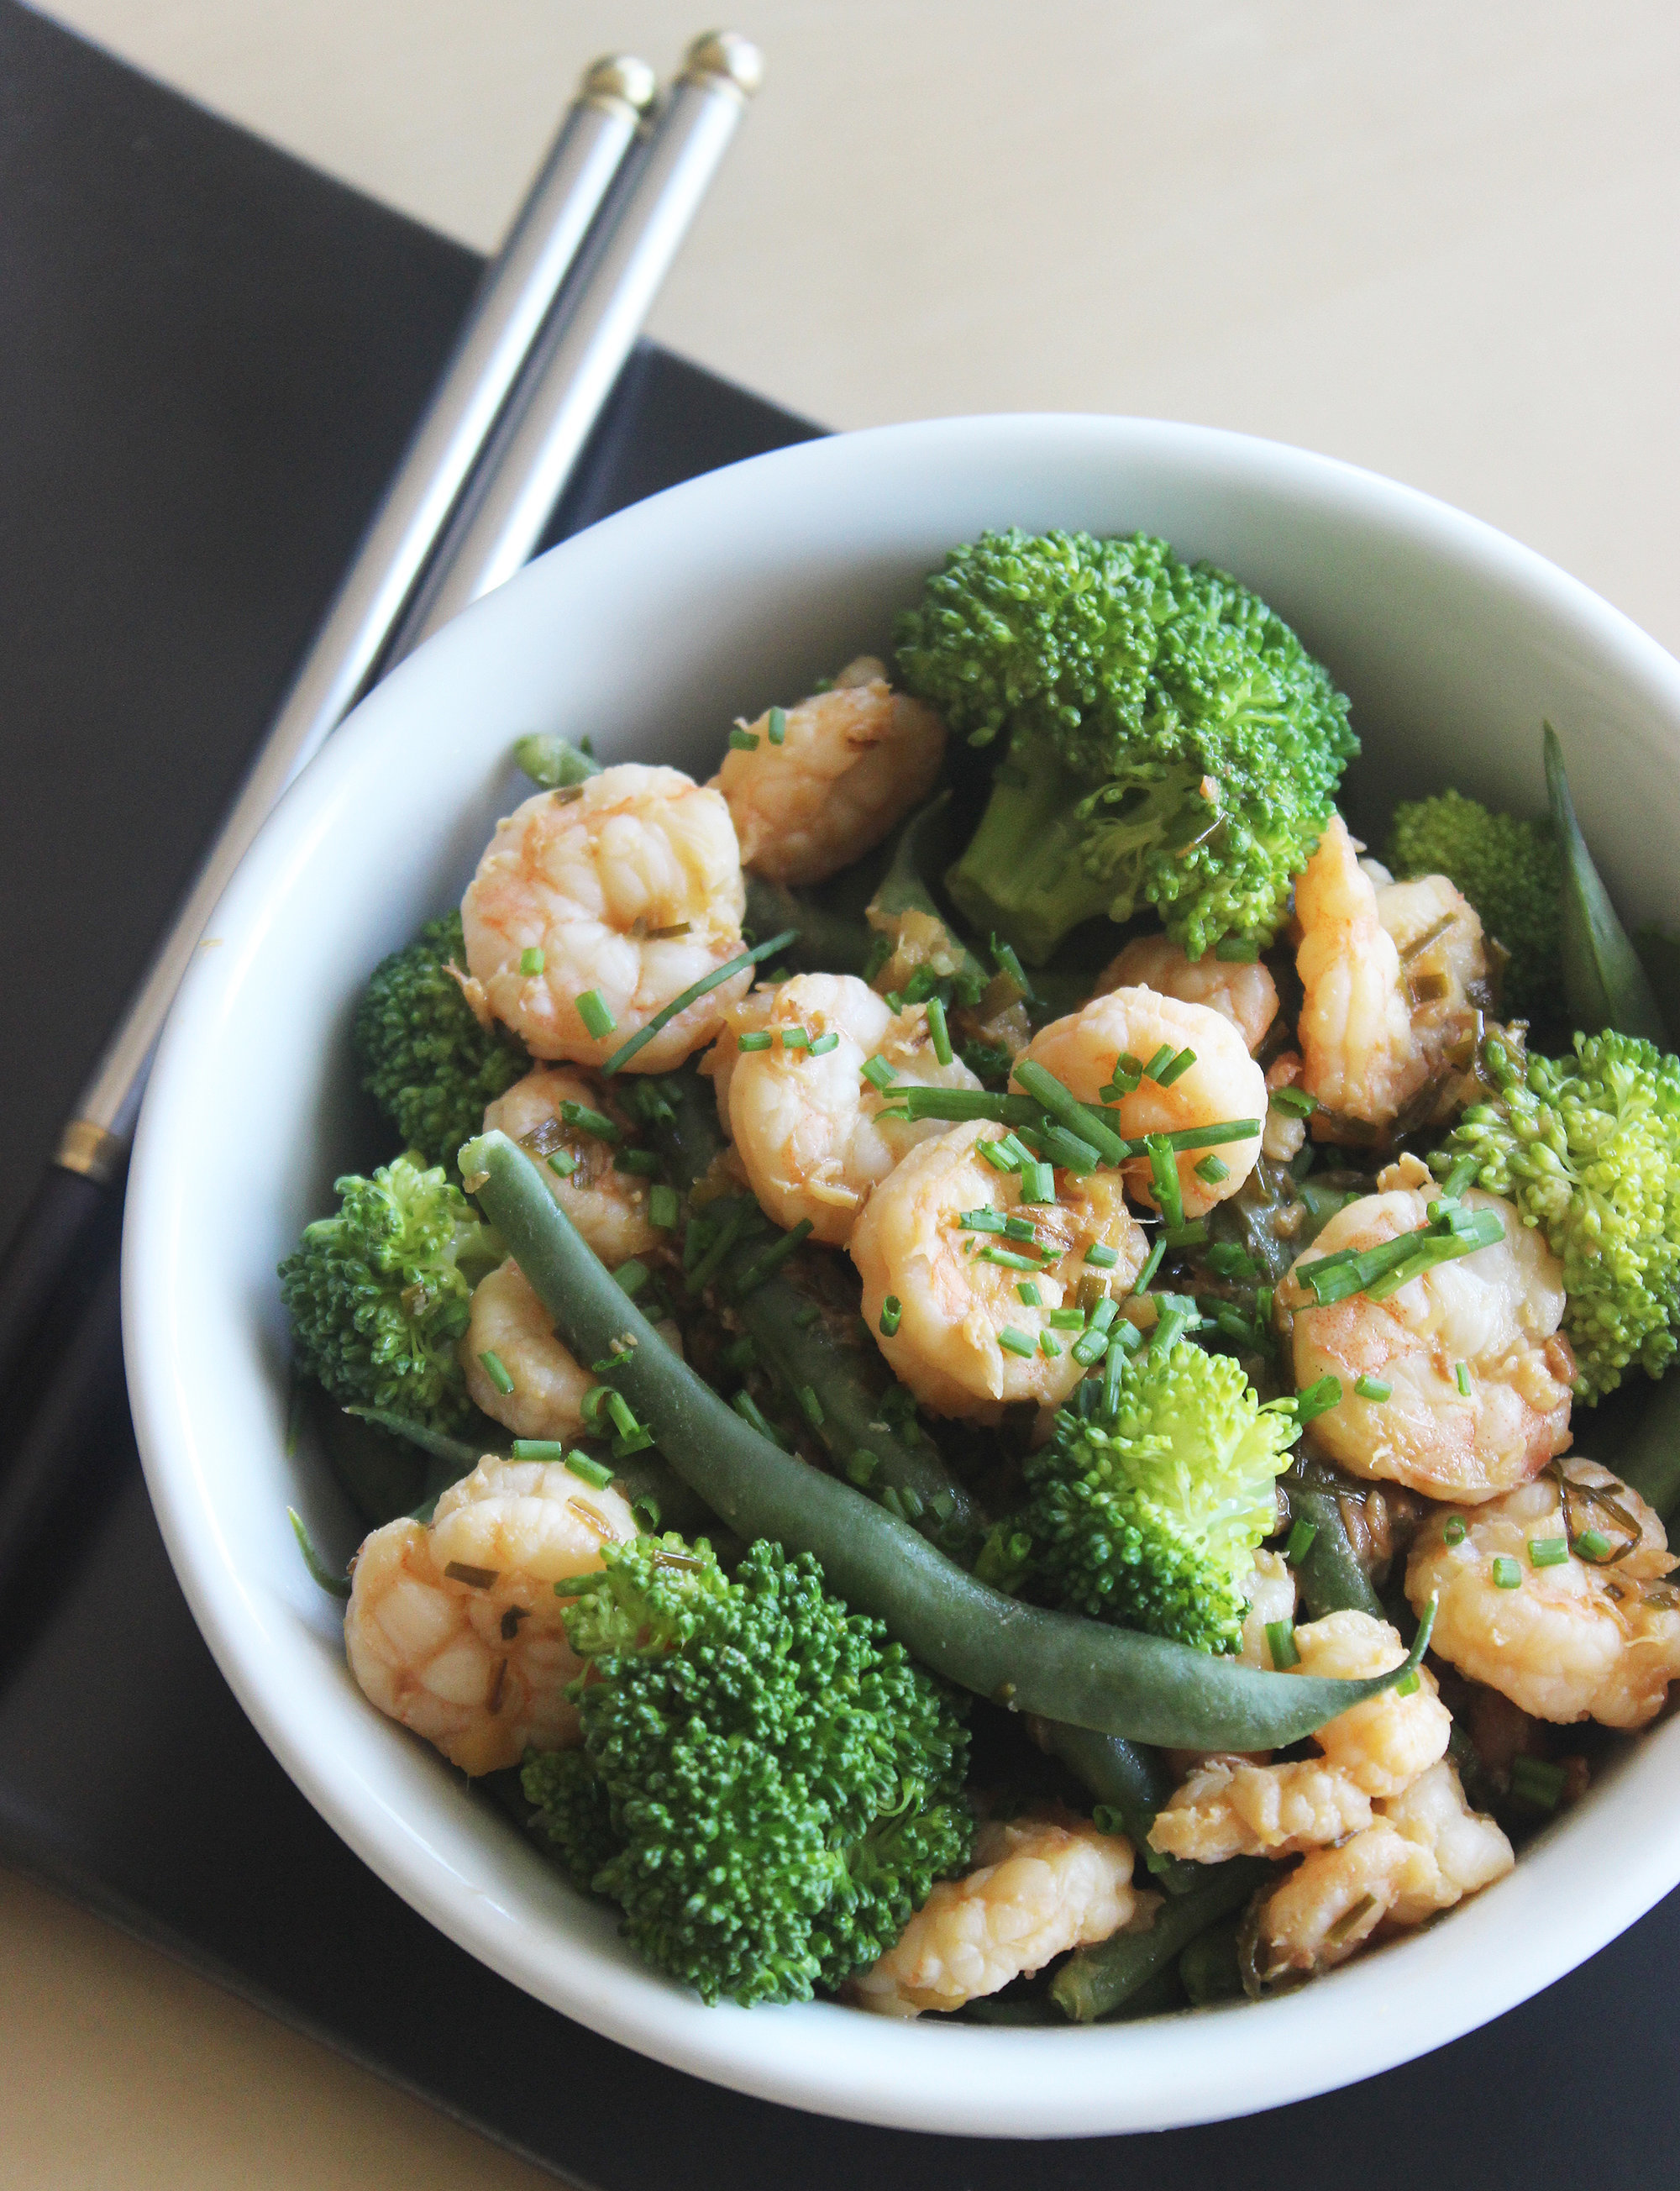 This Filling Shrimp and Broccoli Stir-Fry Is Under 300 Calories